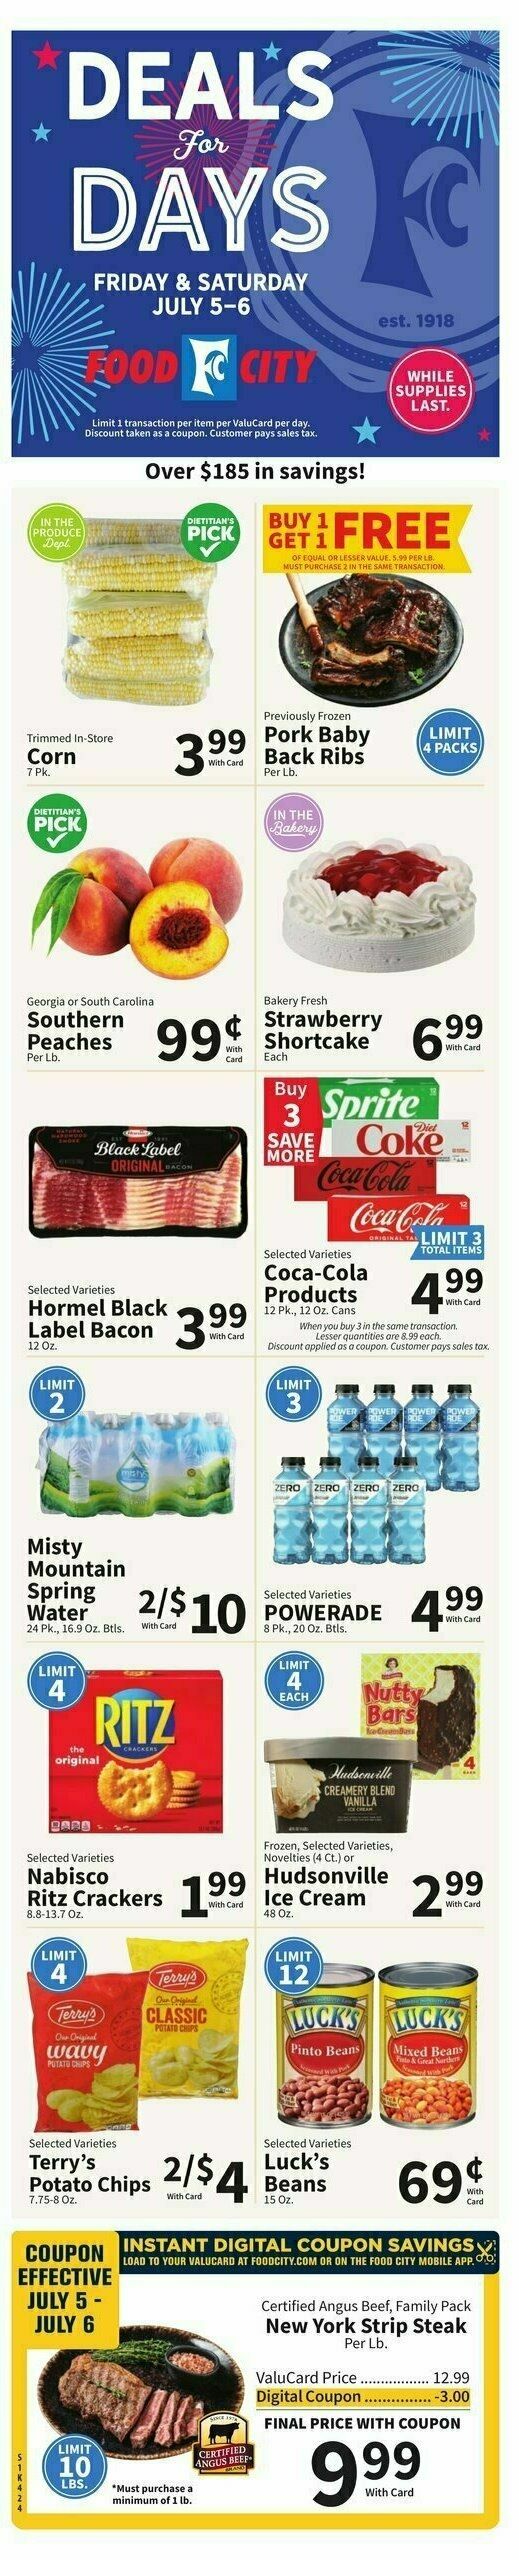 Food City Weekly Ad from July 3